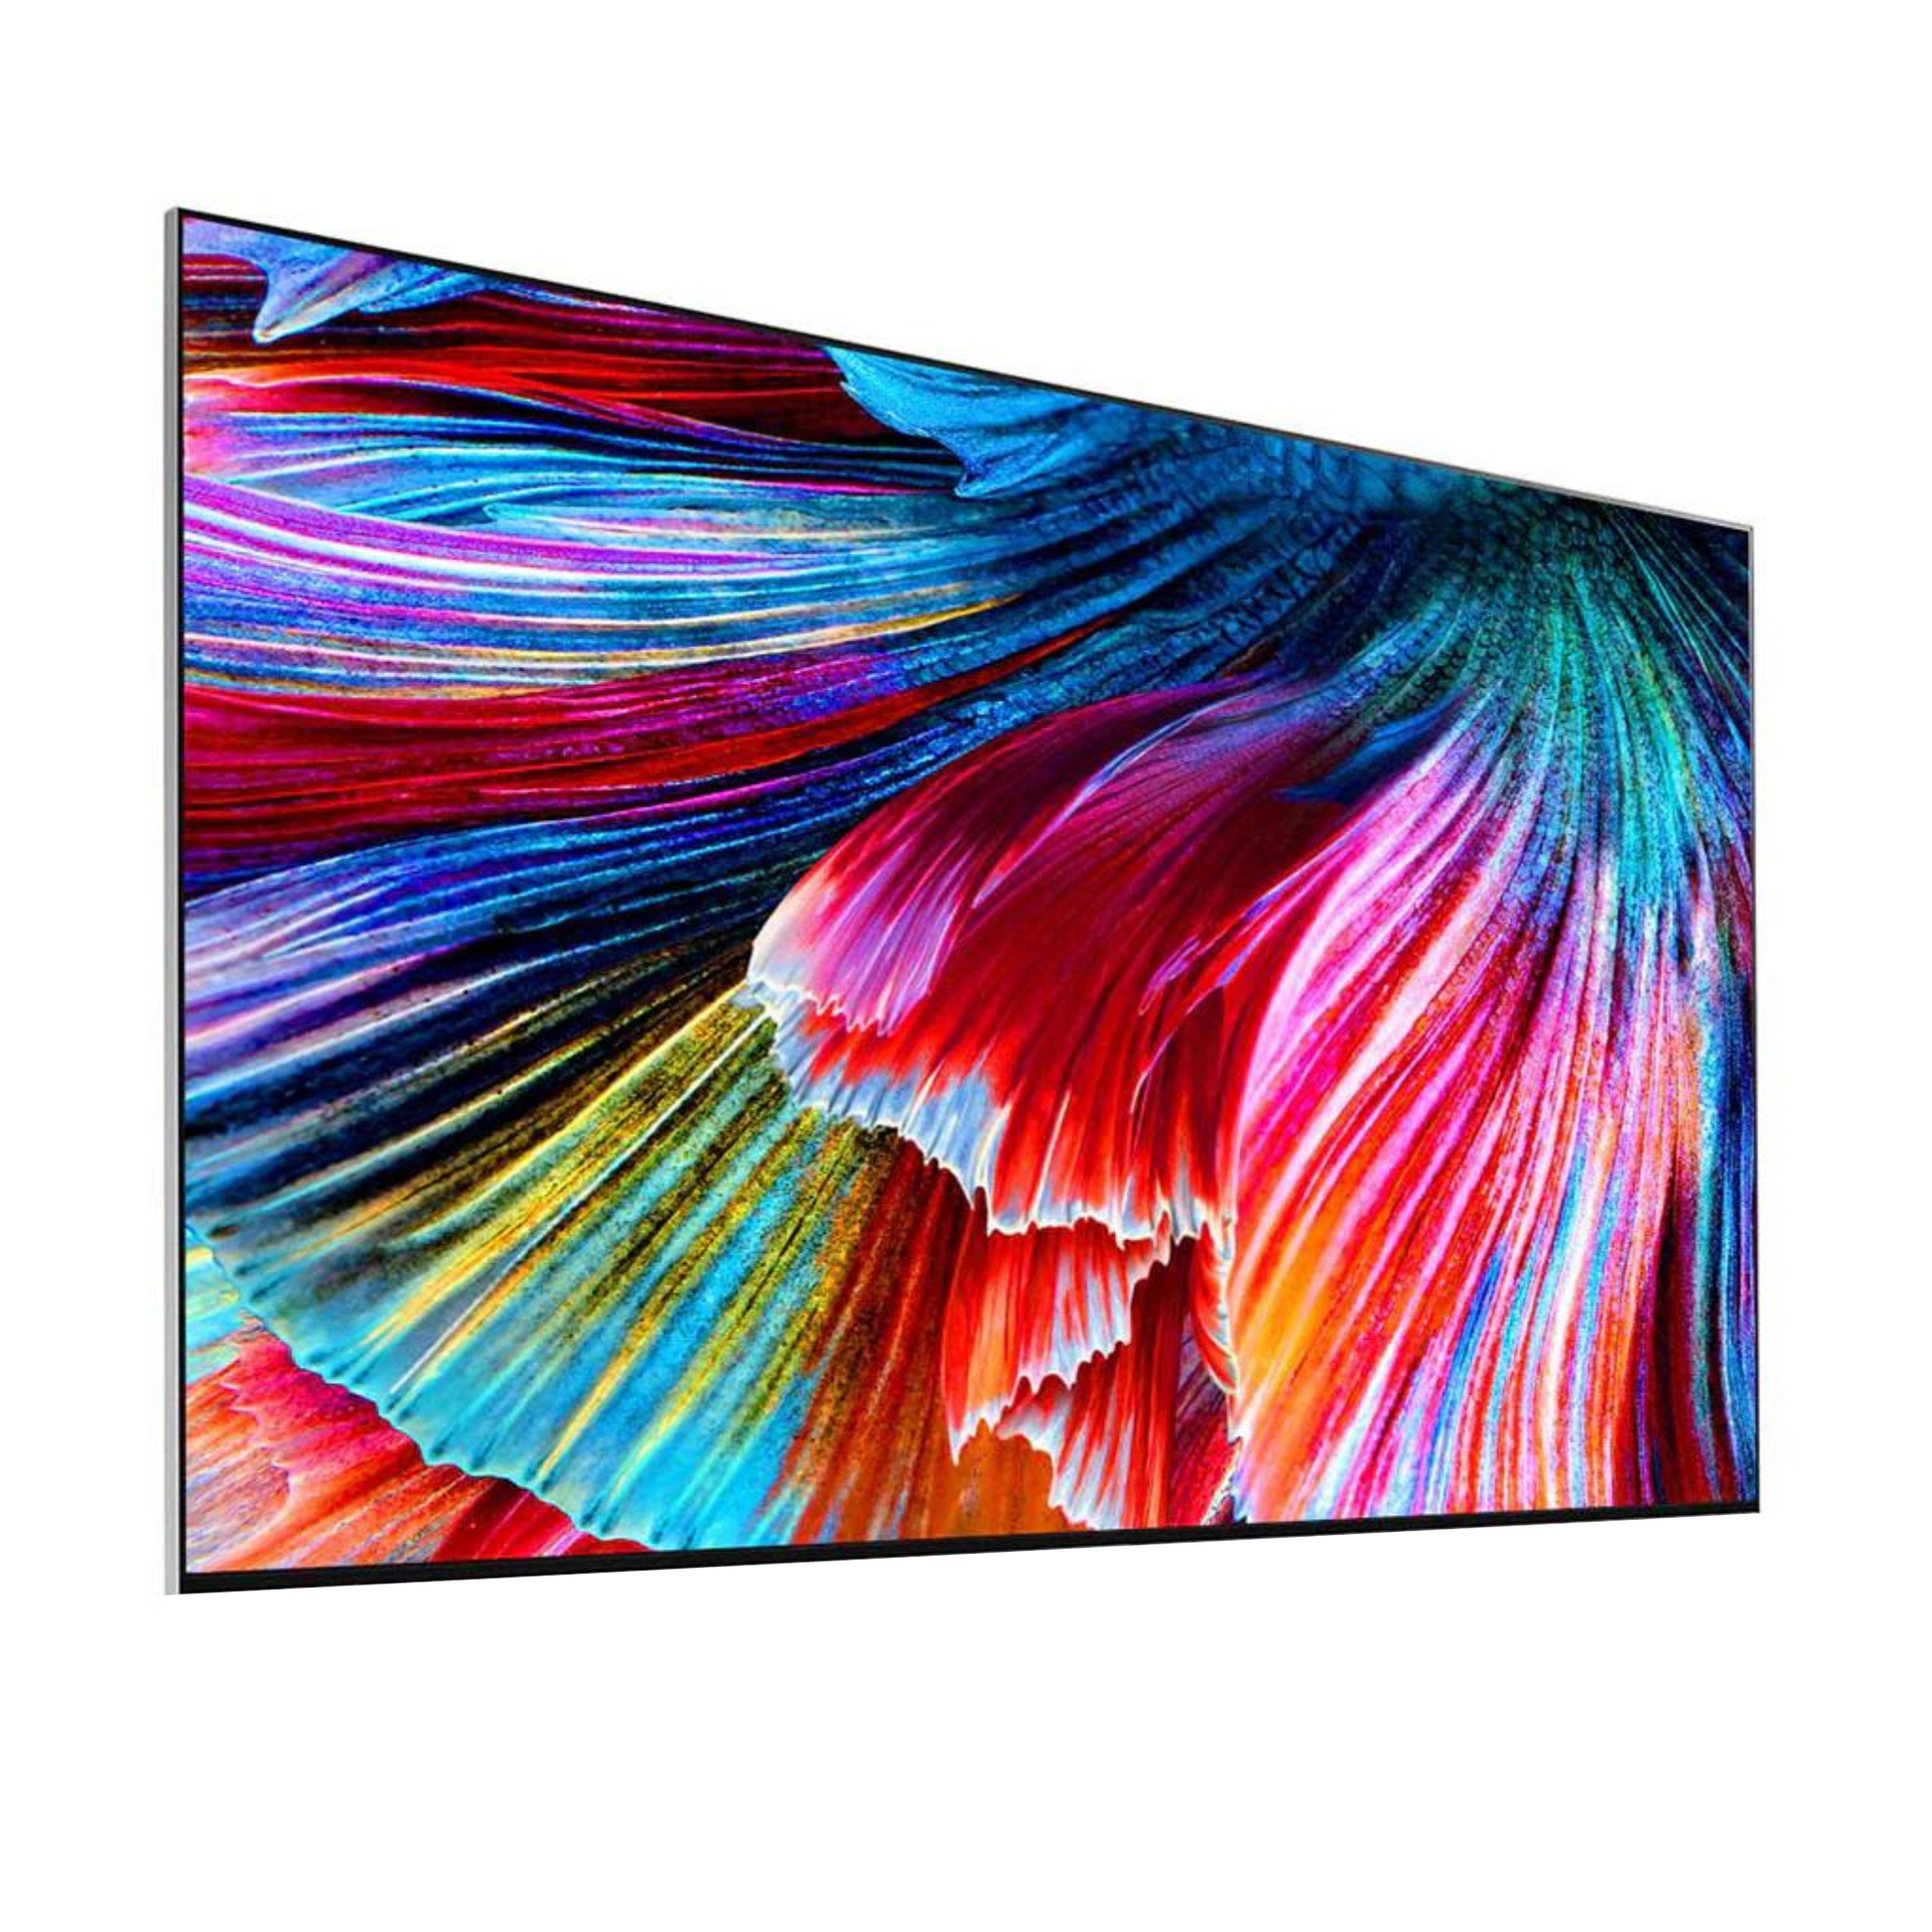 LG 75 inch Smart QNED TV - 8K, 75QNED99